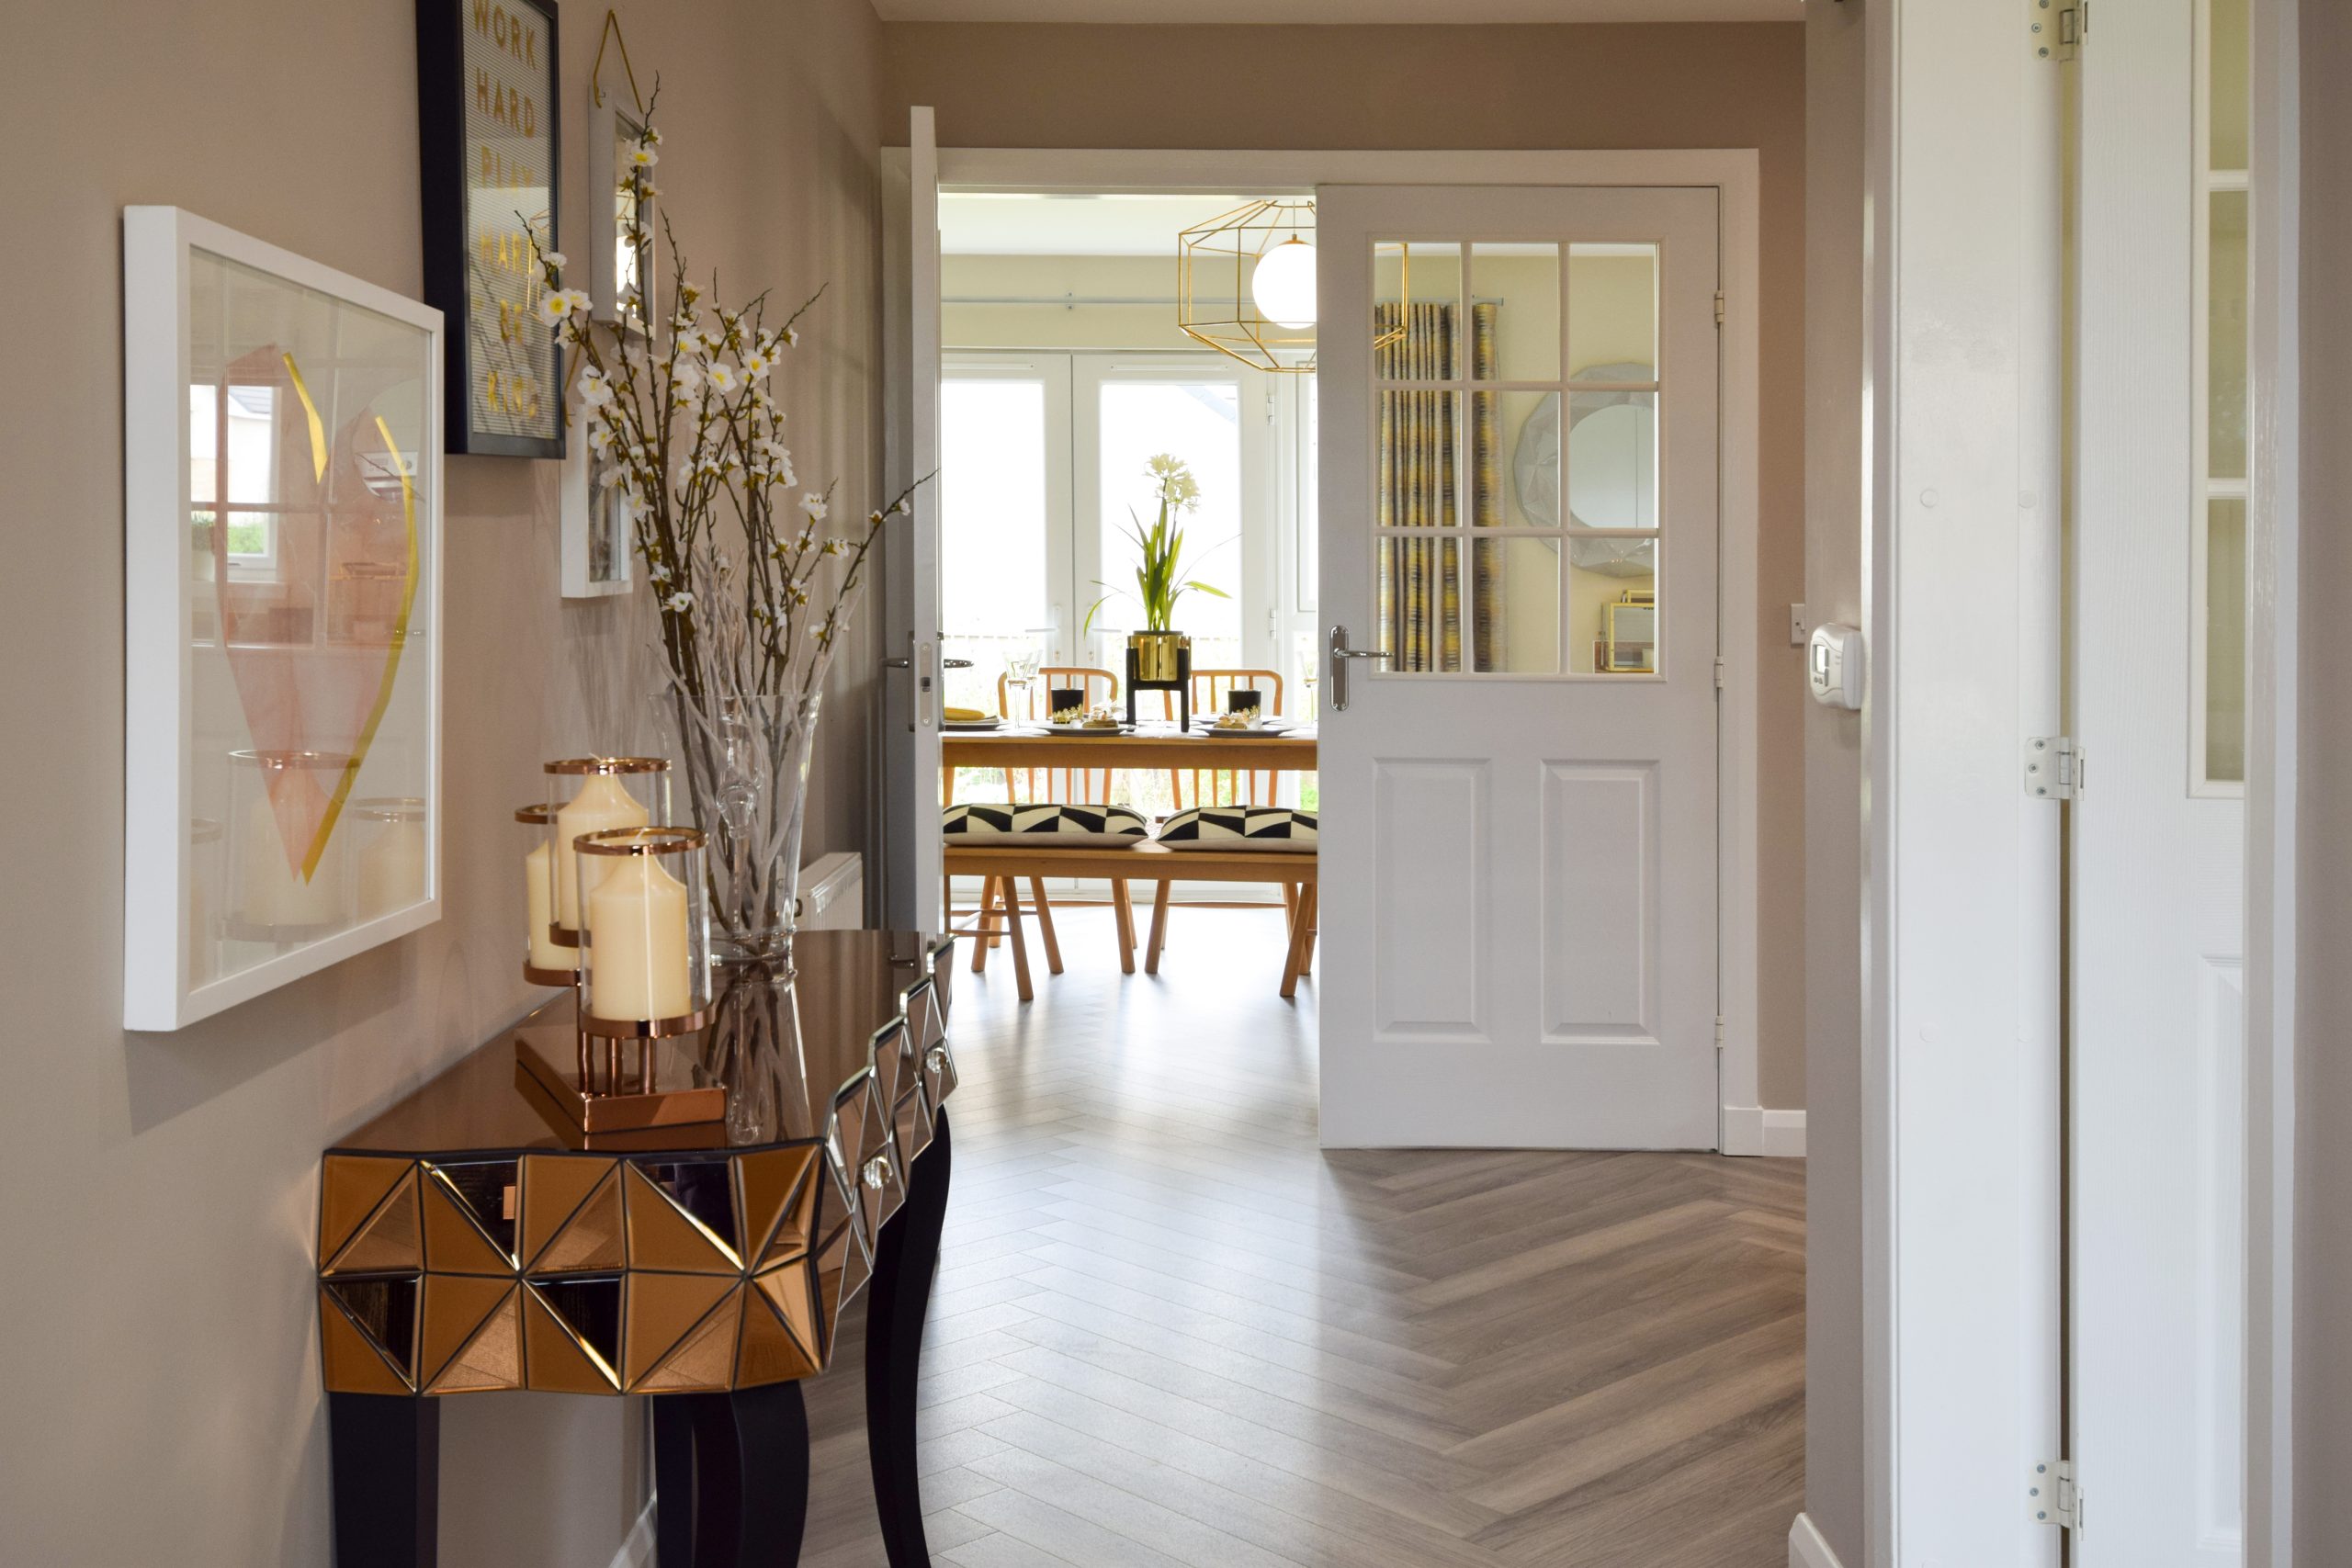 an entrance hall with table, chevron floors and double doors which open onto a dining room